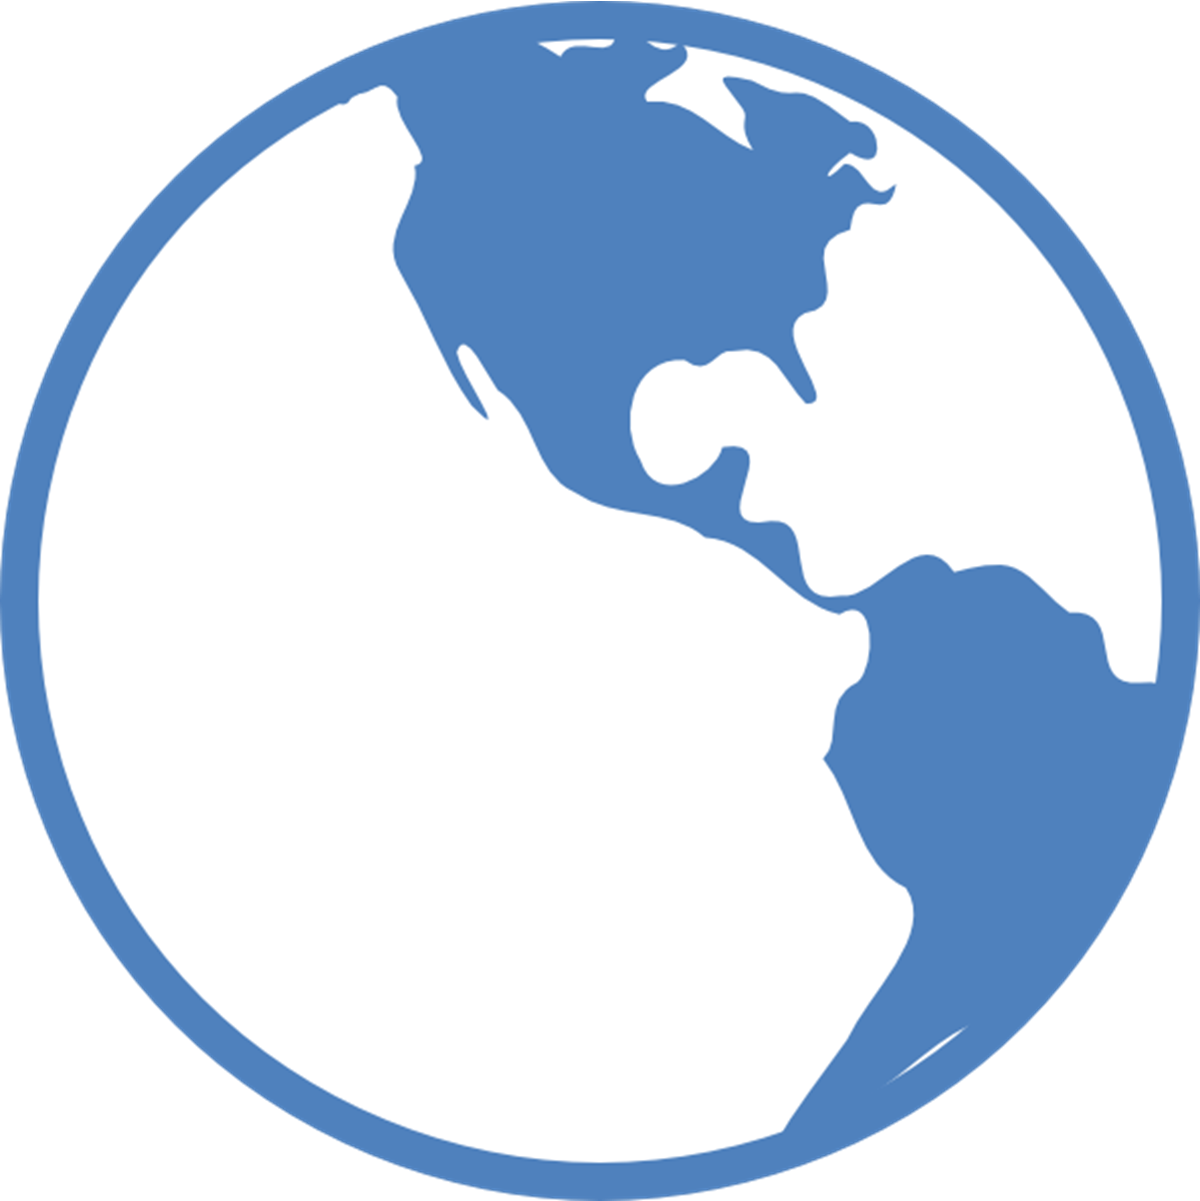 Earth clipart sustainability, Earth sustainability Transparent FREE for ...